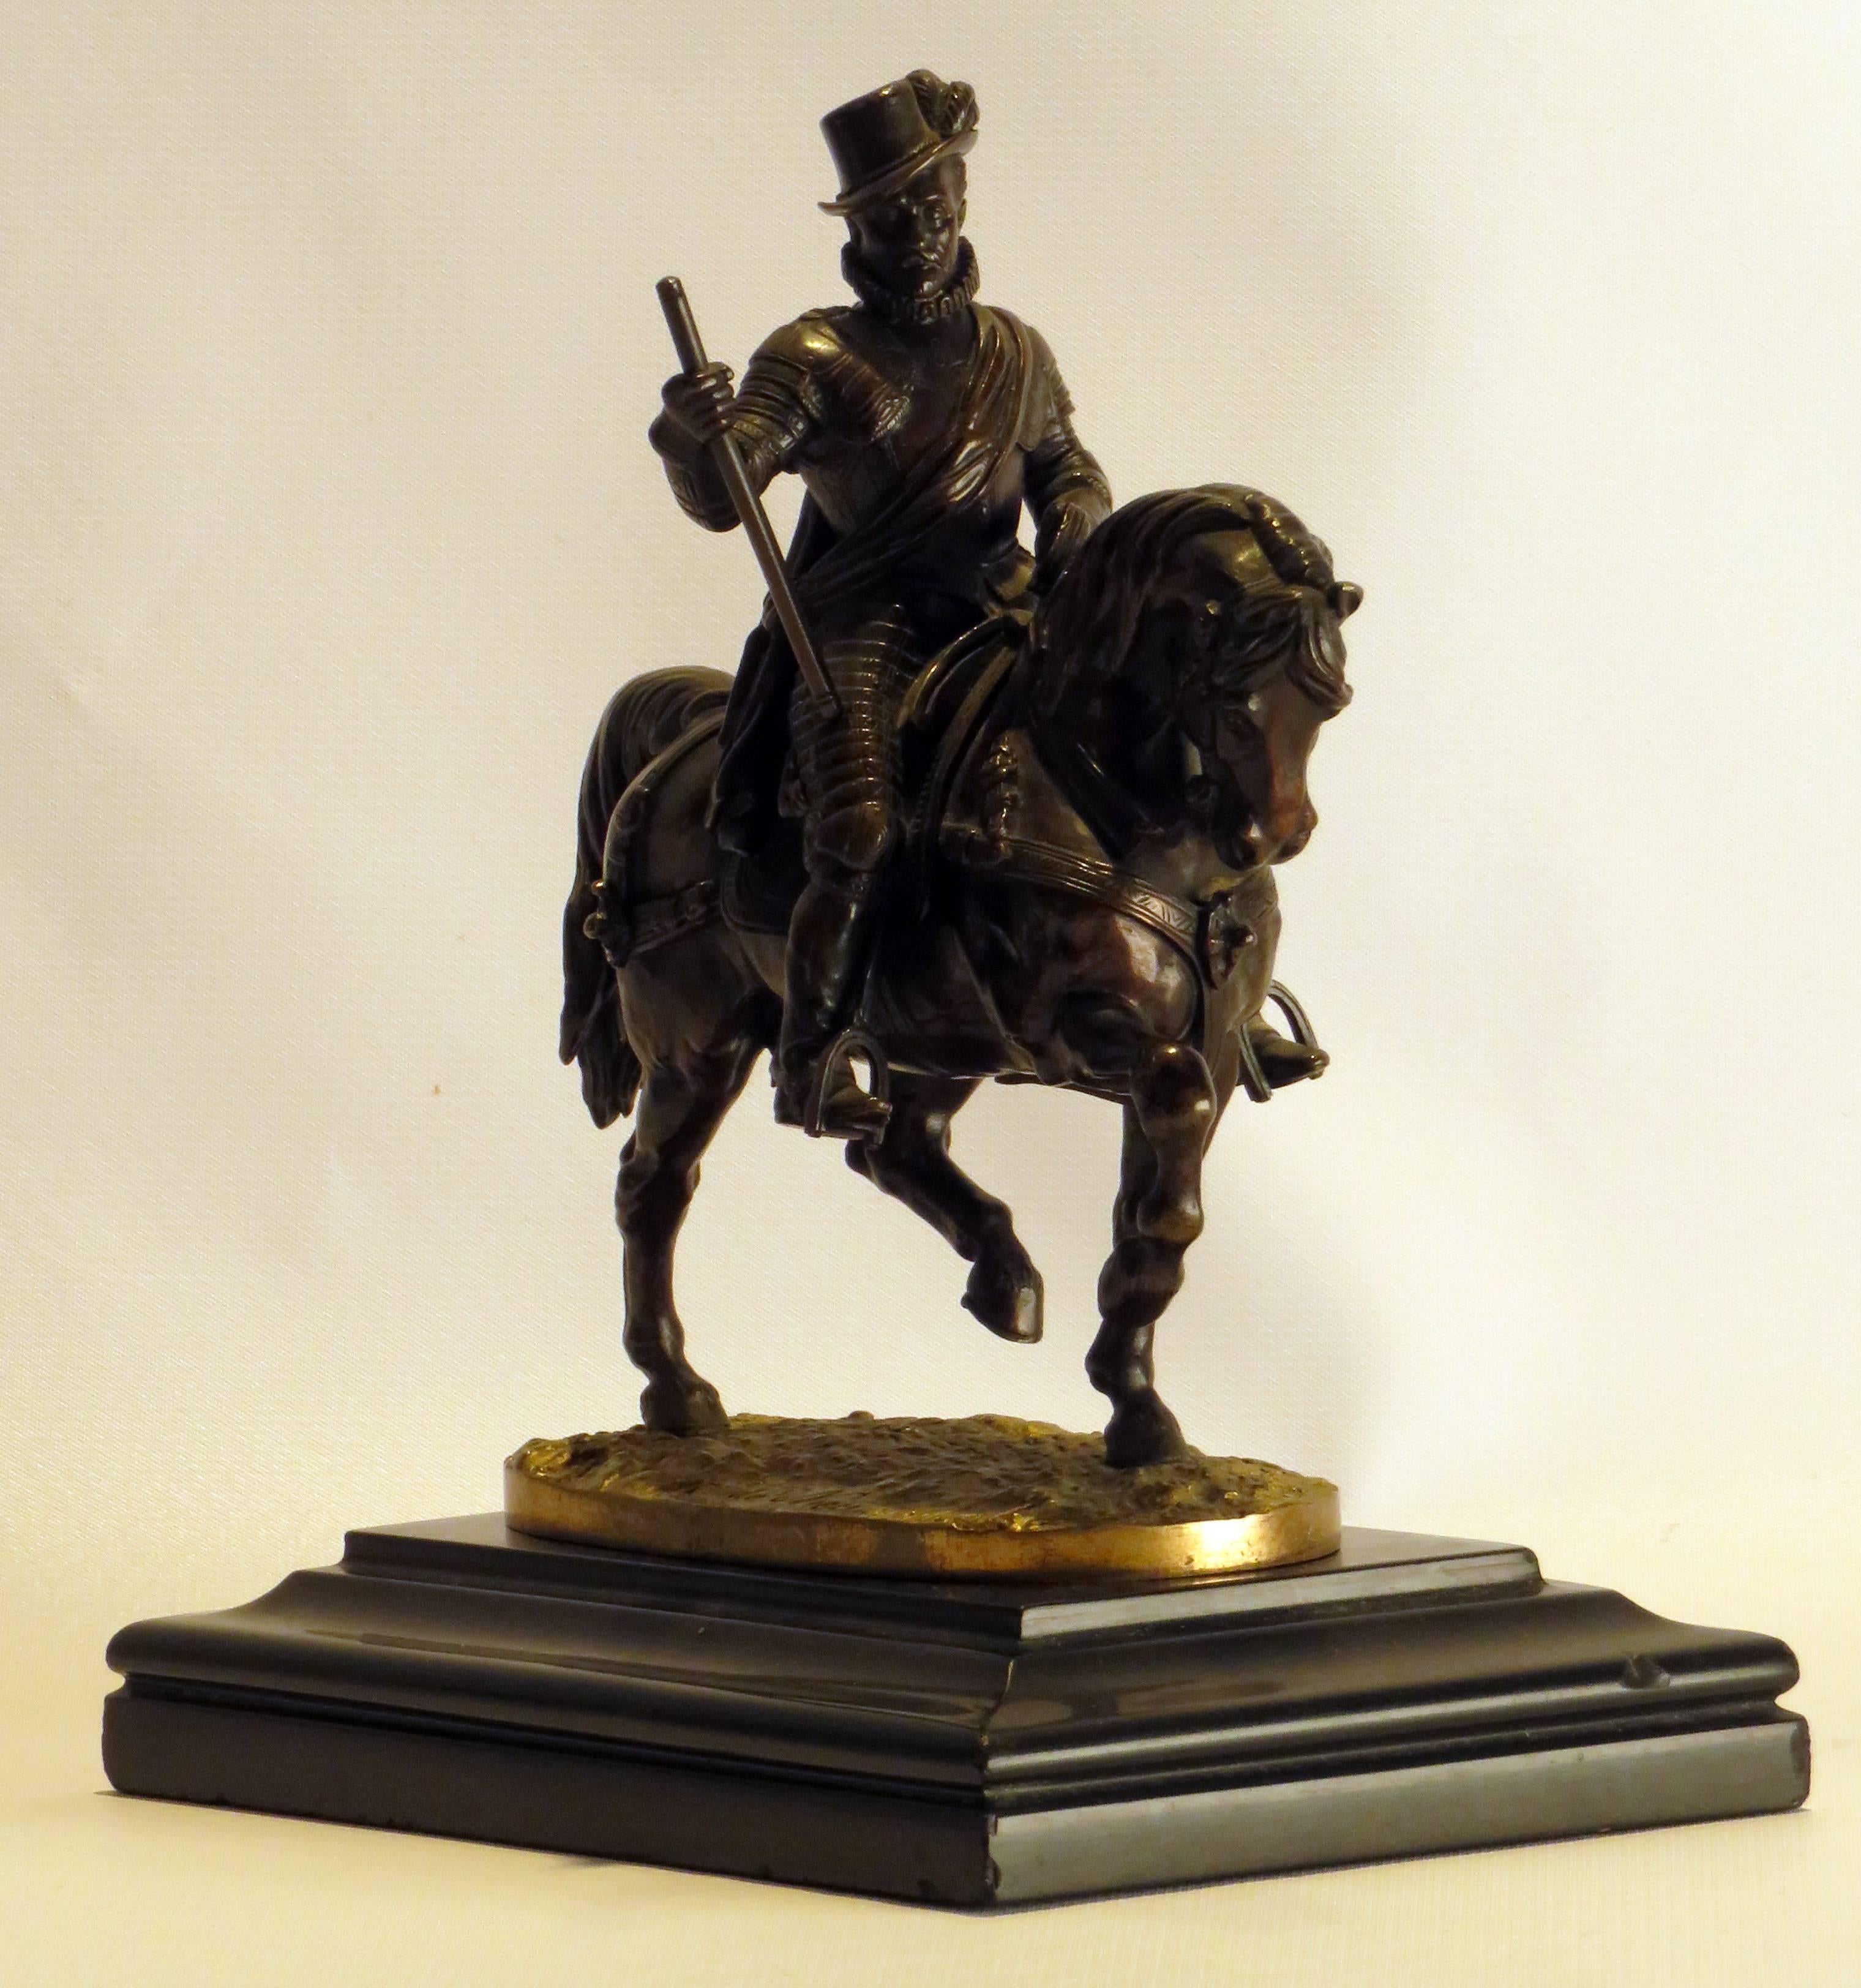 This small and elegant bronze was sculpted by Count Nieuwerkerke and cast at the Louvre Foundry. This statue commemorates Prince William of Orange who led an uprising against the Spanish Hapbsburg rulers that persecuted Dutch Protestants during the